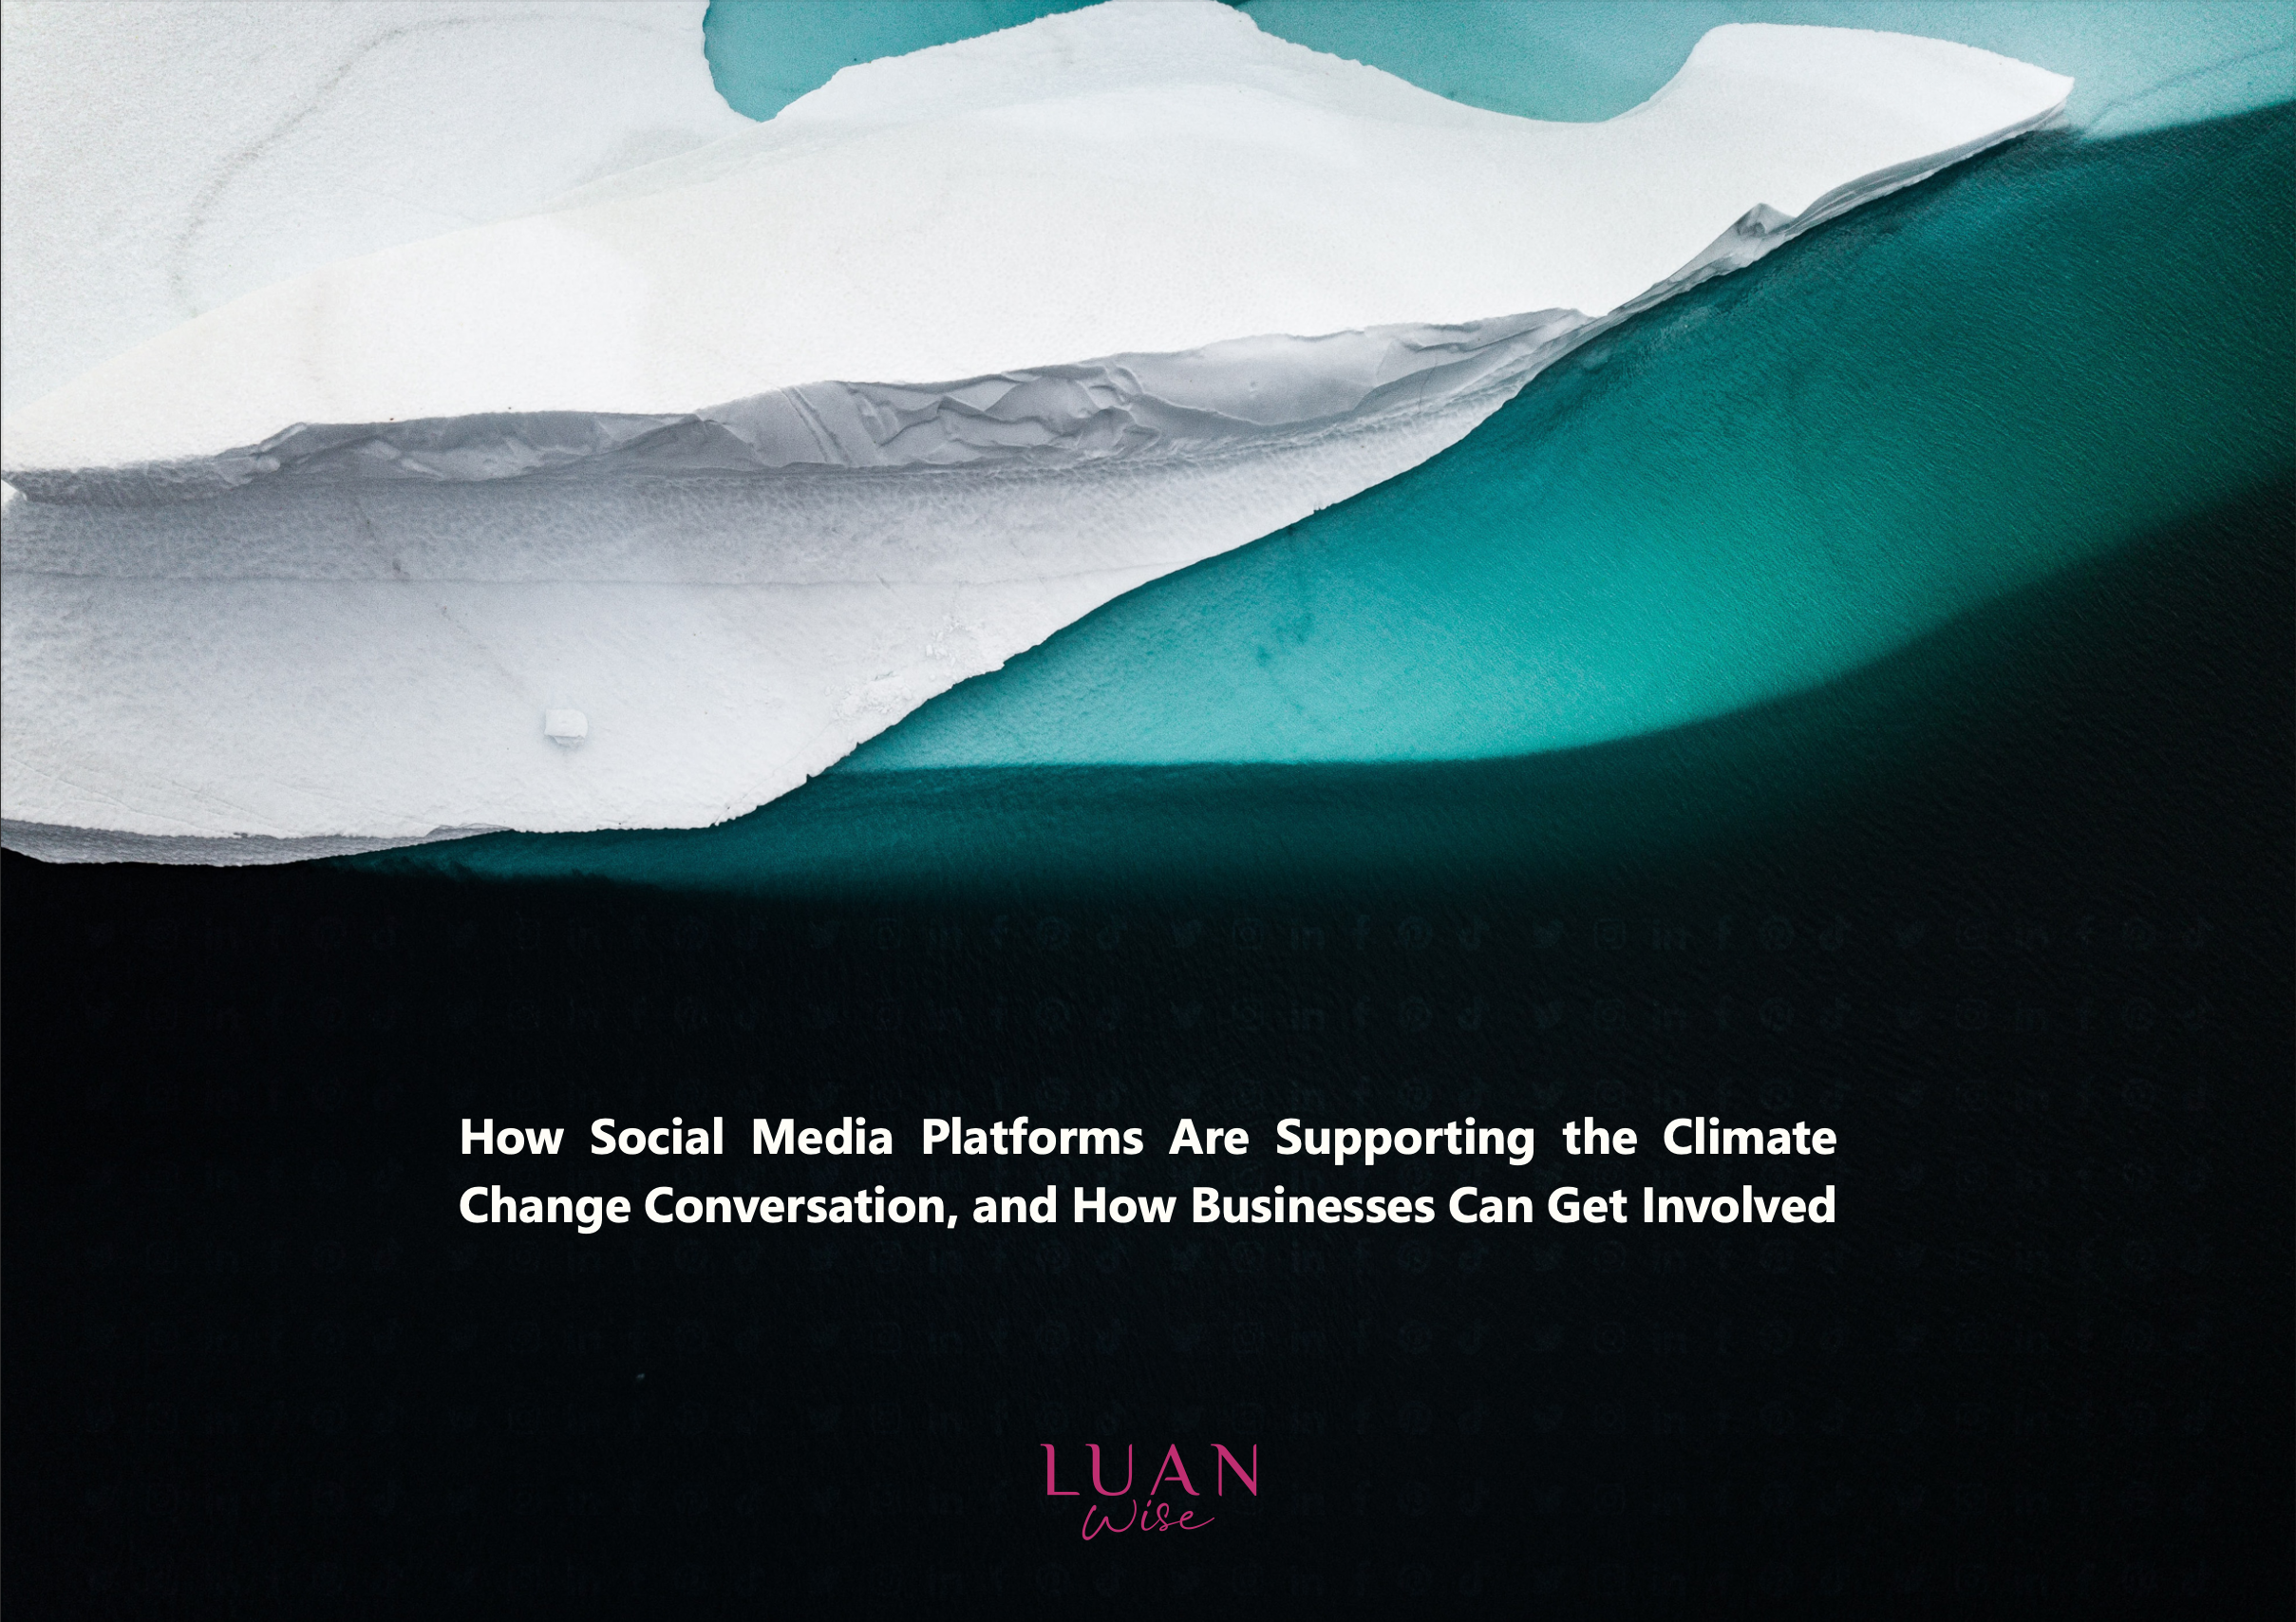 How Social Media Platforms Are Supporting the Climate Change Conversation, and How Businesses Can Get Involved